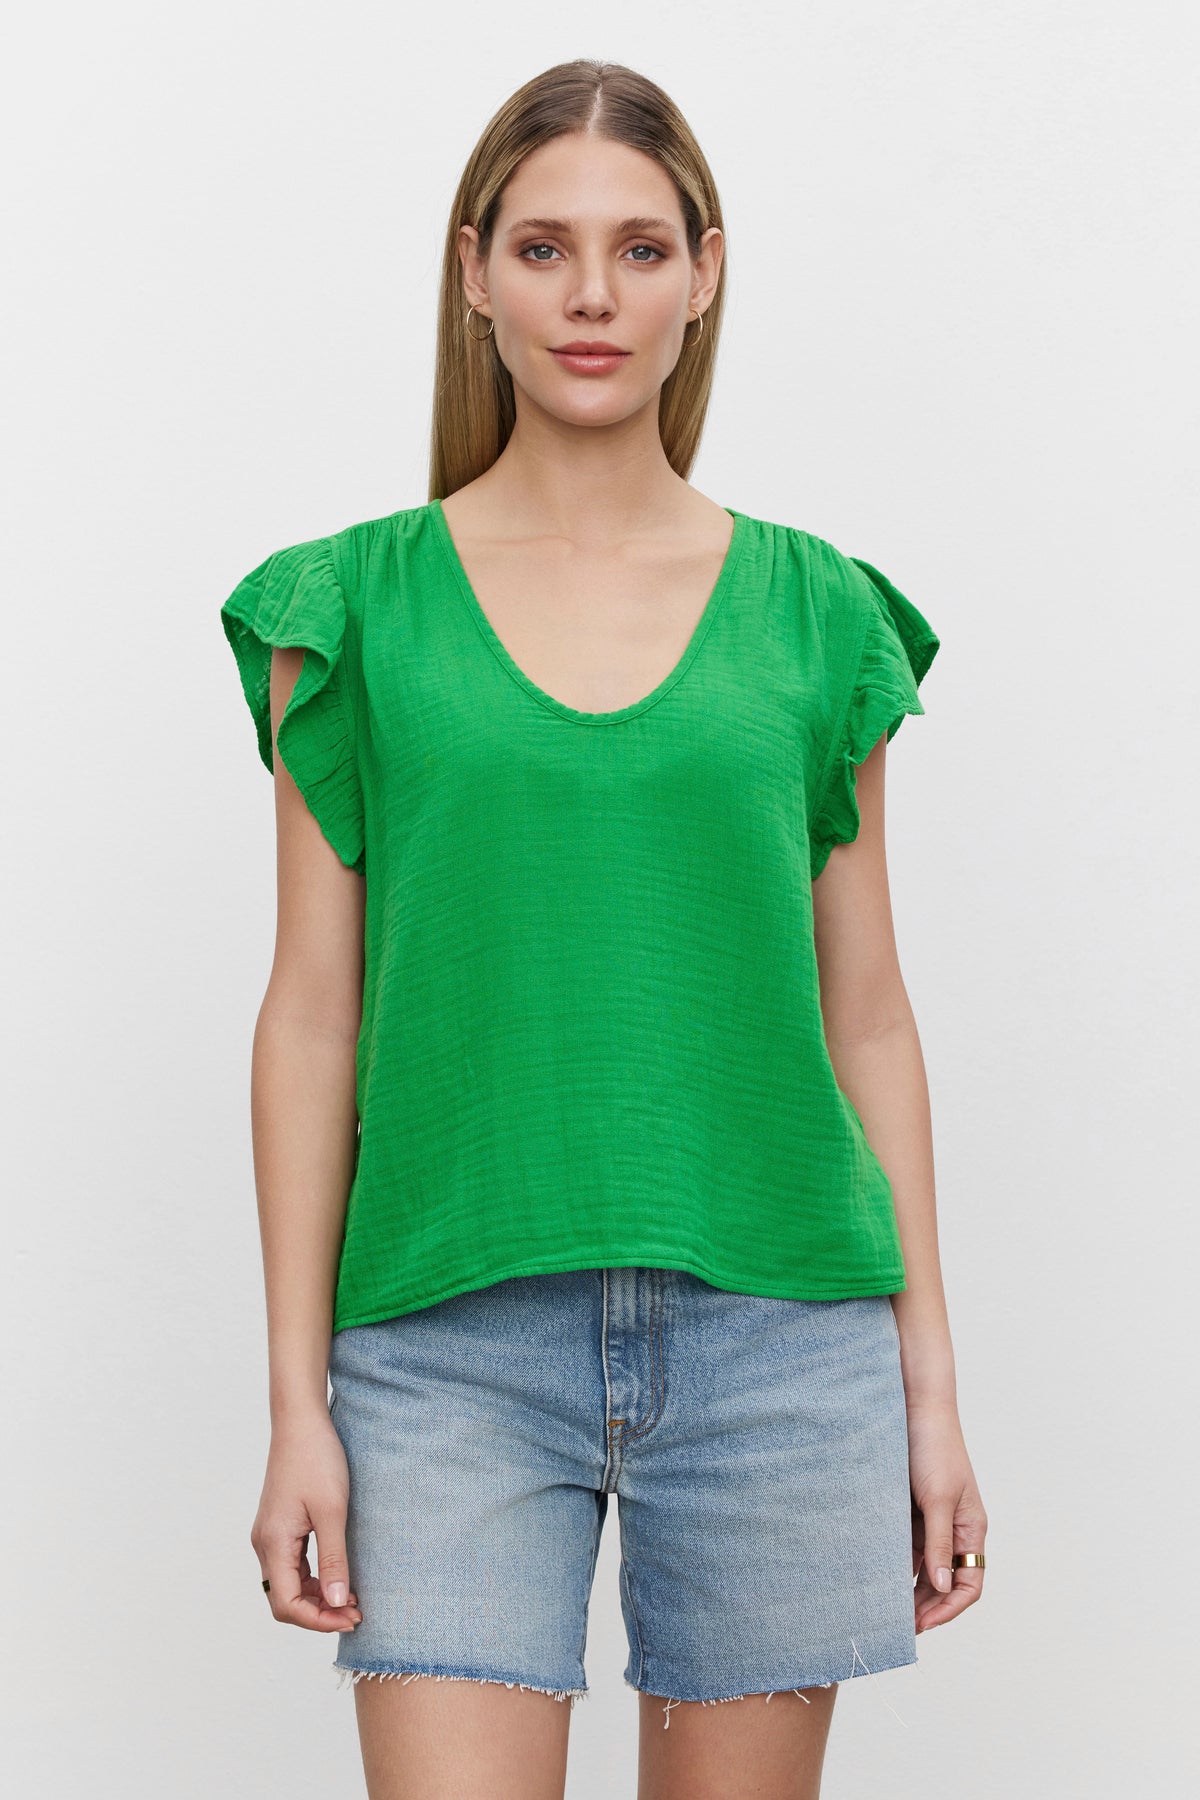 The model is wearing a REMI RUFFLE SLEEVE TOP from Velvet by Graham & Spencer, giving off a spring vibe.-36247896981697